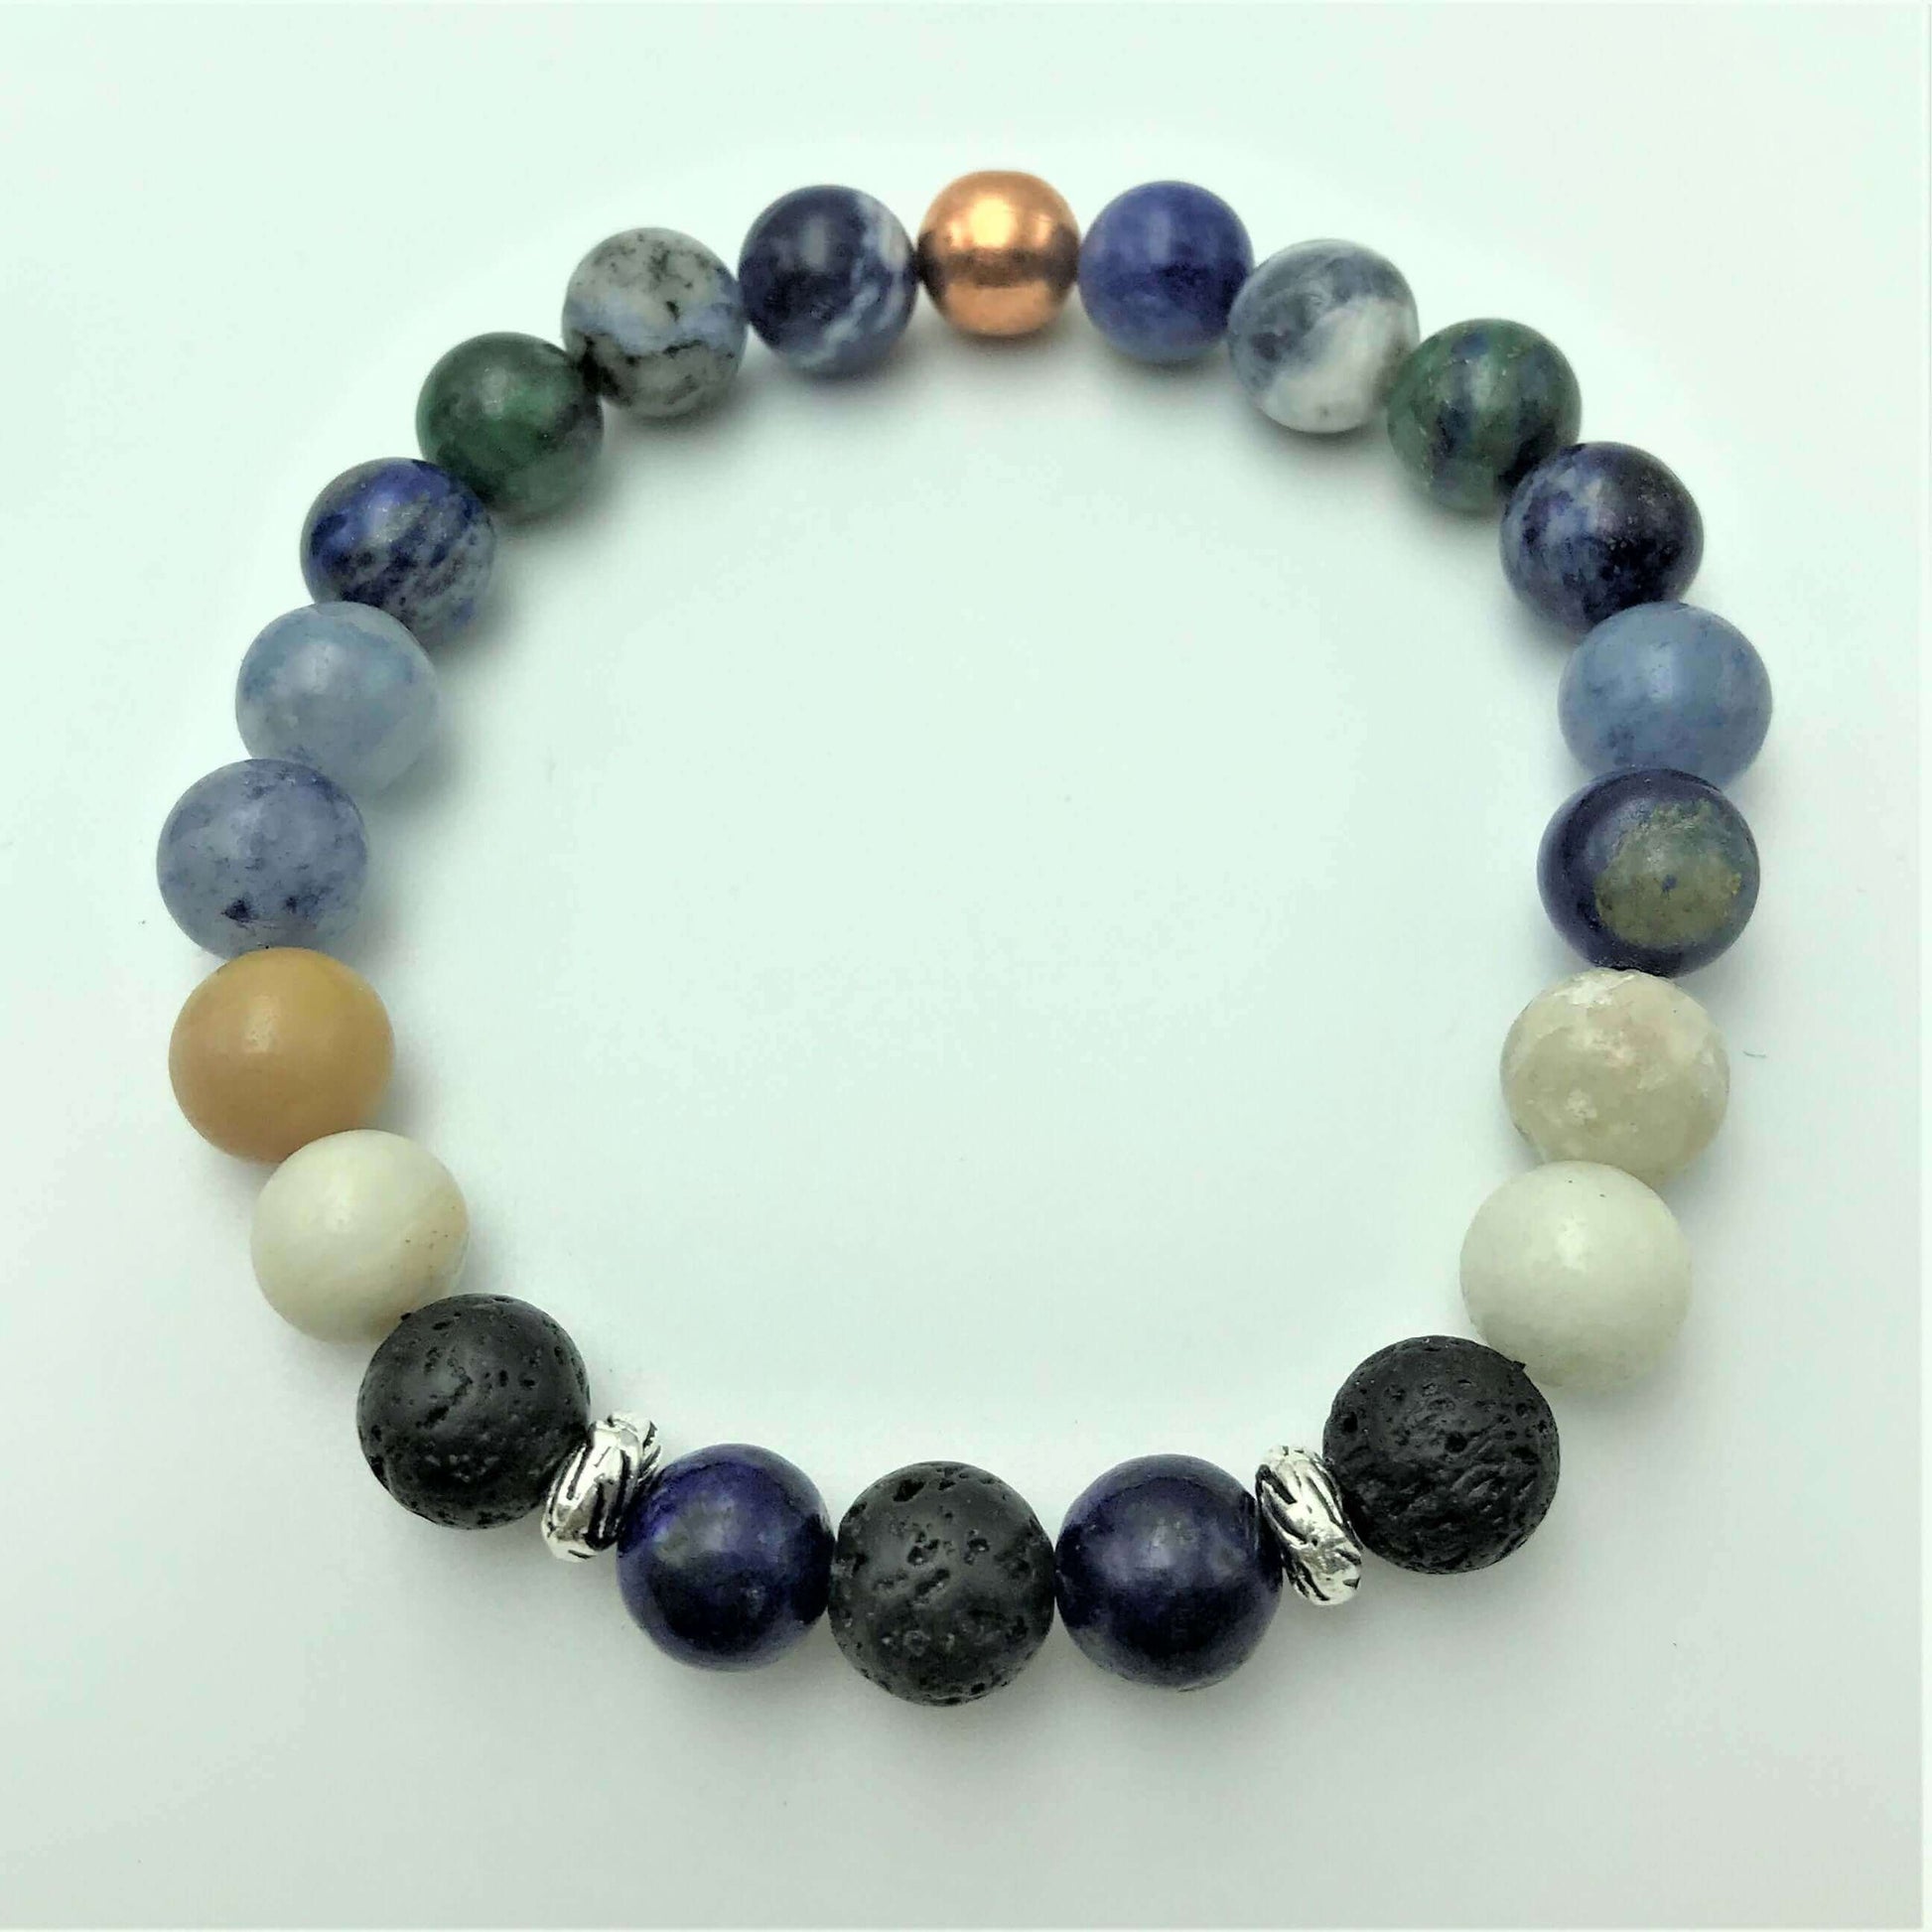 Well-Being bracelet and bracelet & oil set at $10 only from Spiral Rain